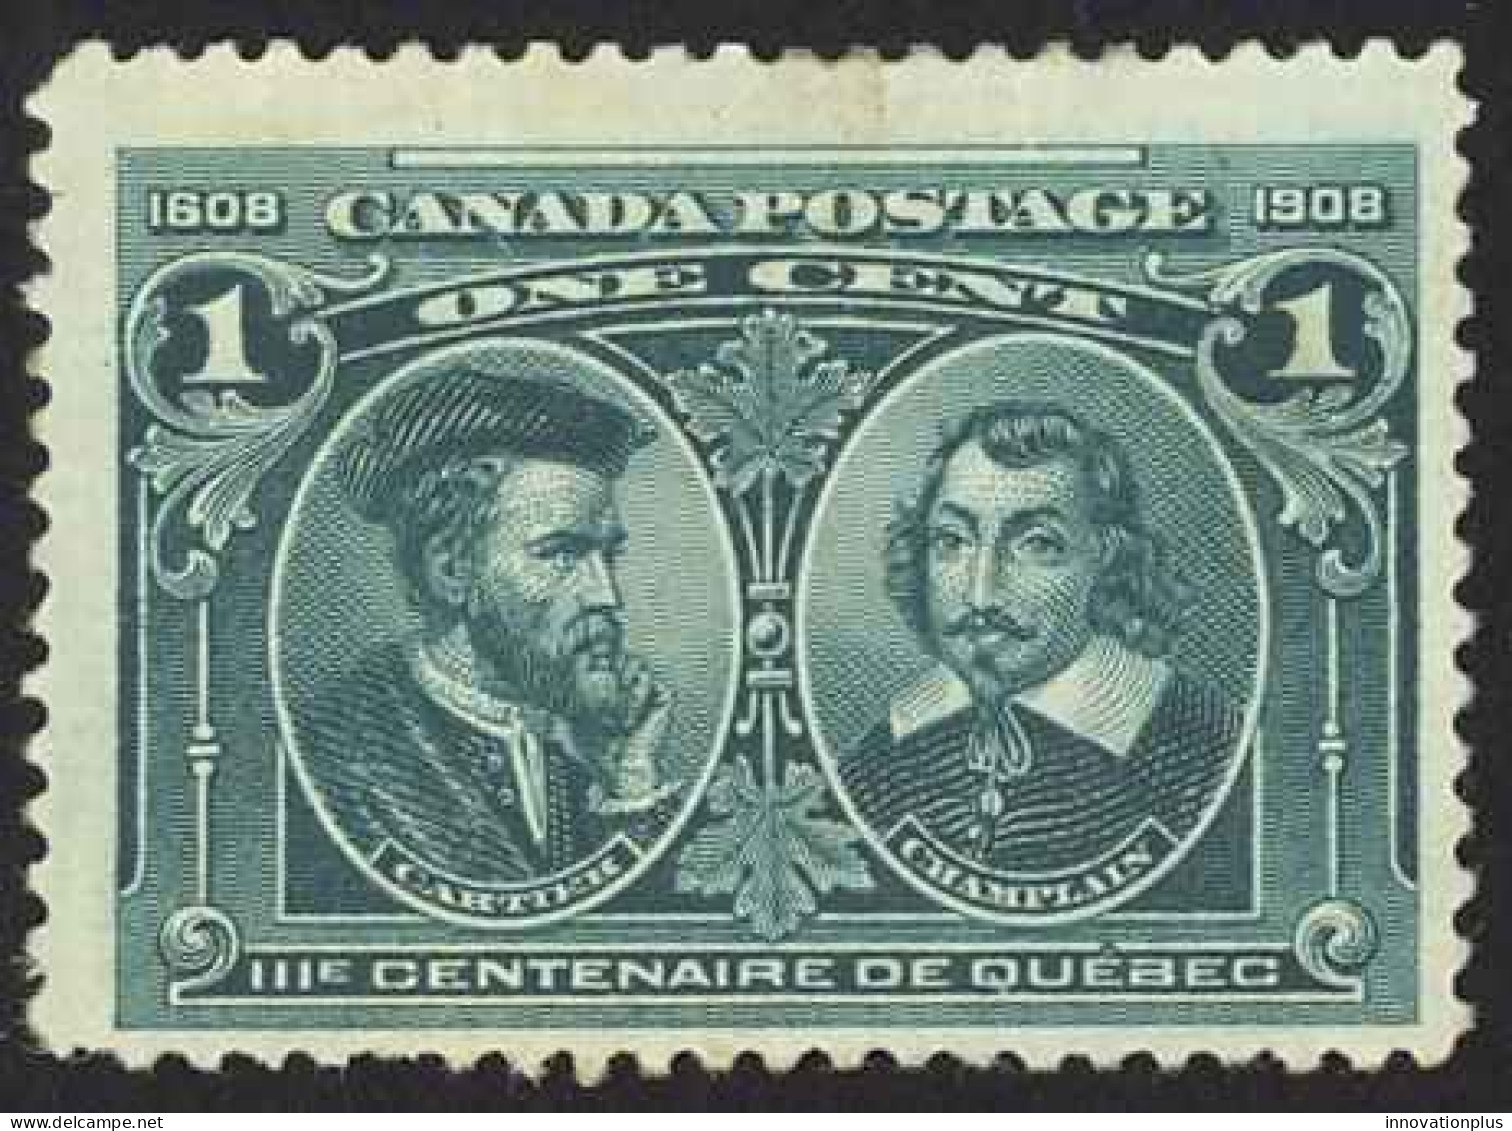 Canada Sc# 97 MH (b) 1908 1c Green Cartier & Champlain - Unused Stamps